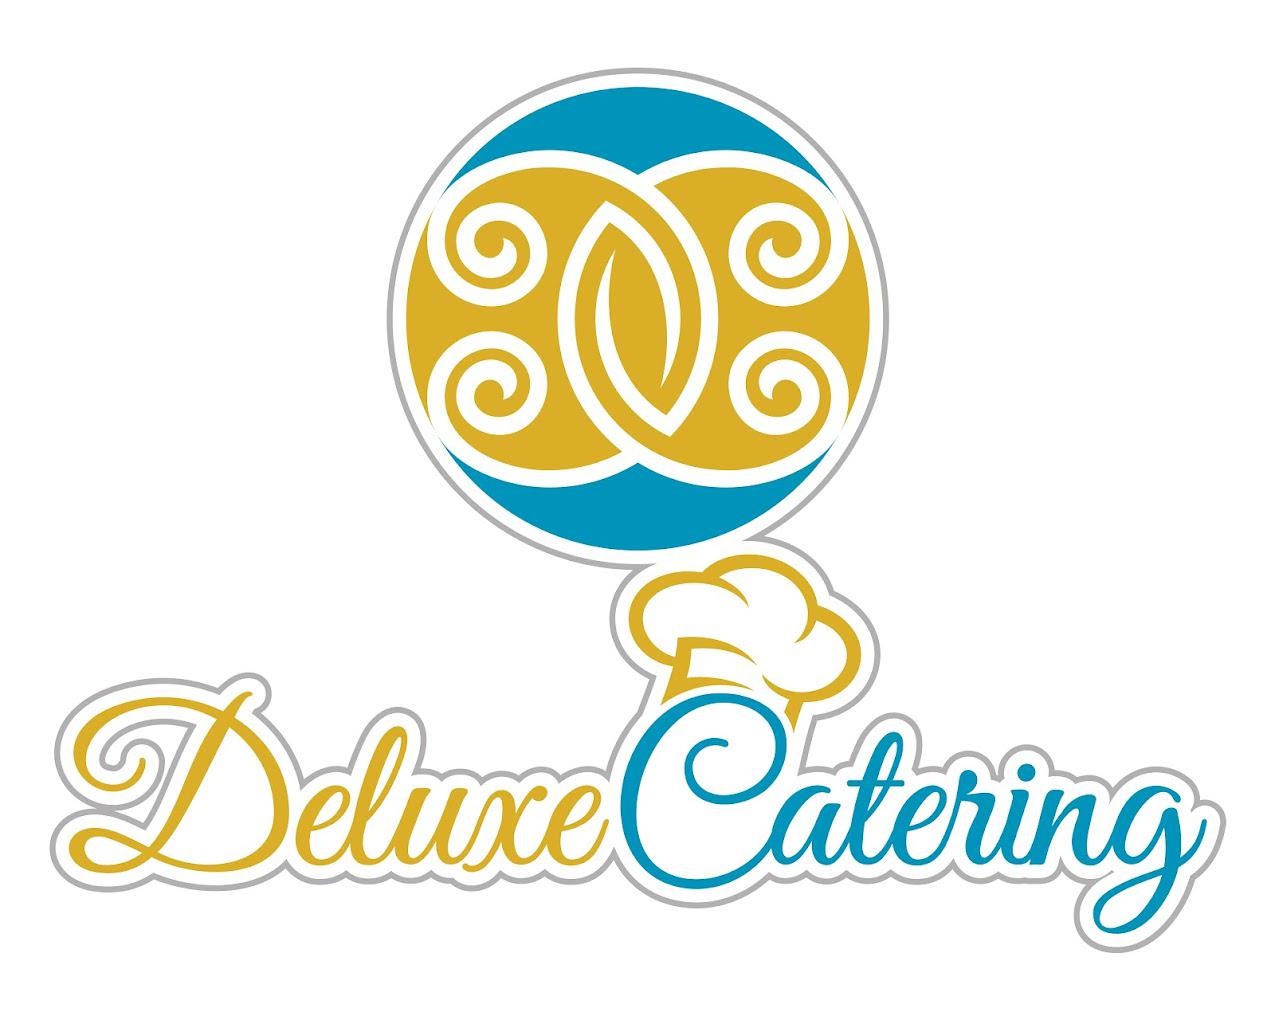 Deluxe Kosher Catering 7588 Haverford Ave